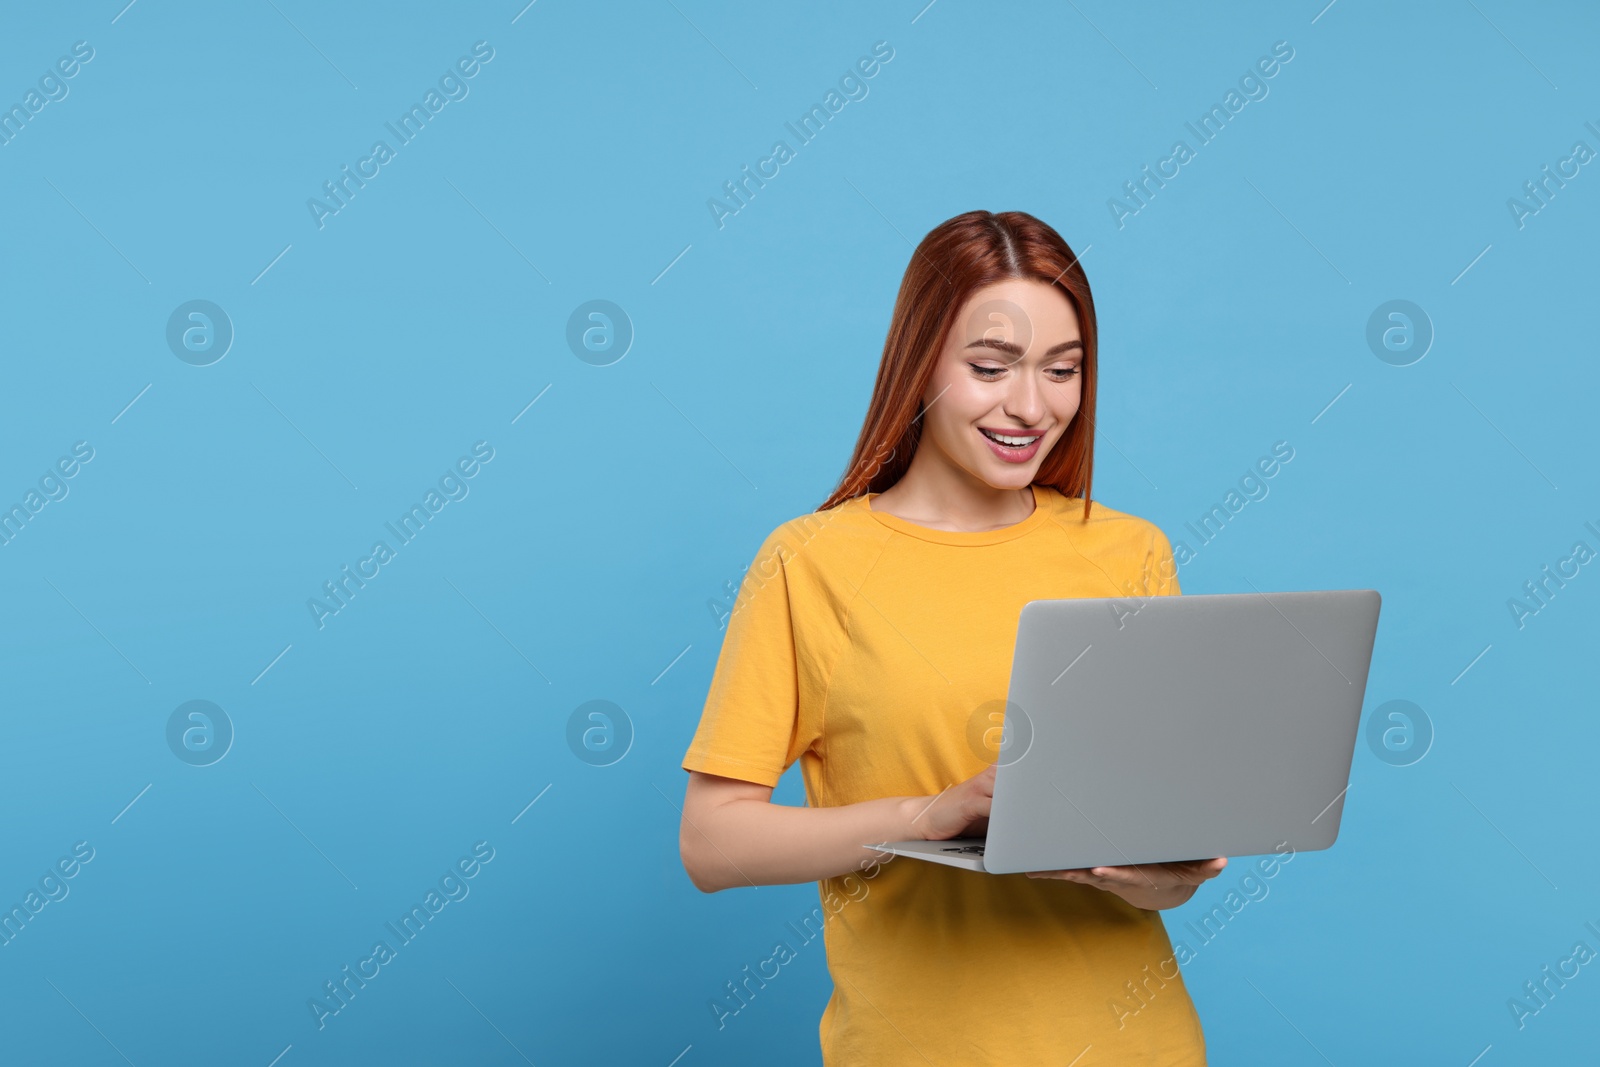 Photo of Smiling young woman working with laptop on light blue background, space for text